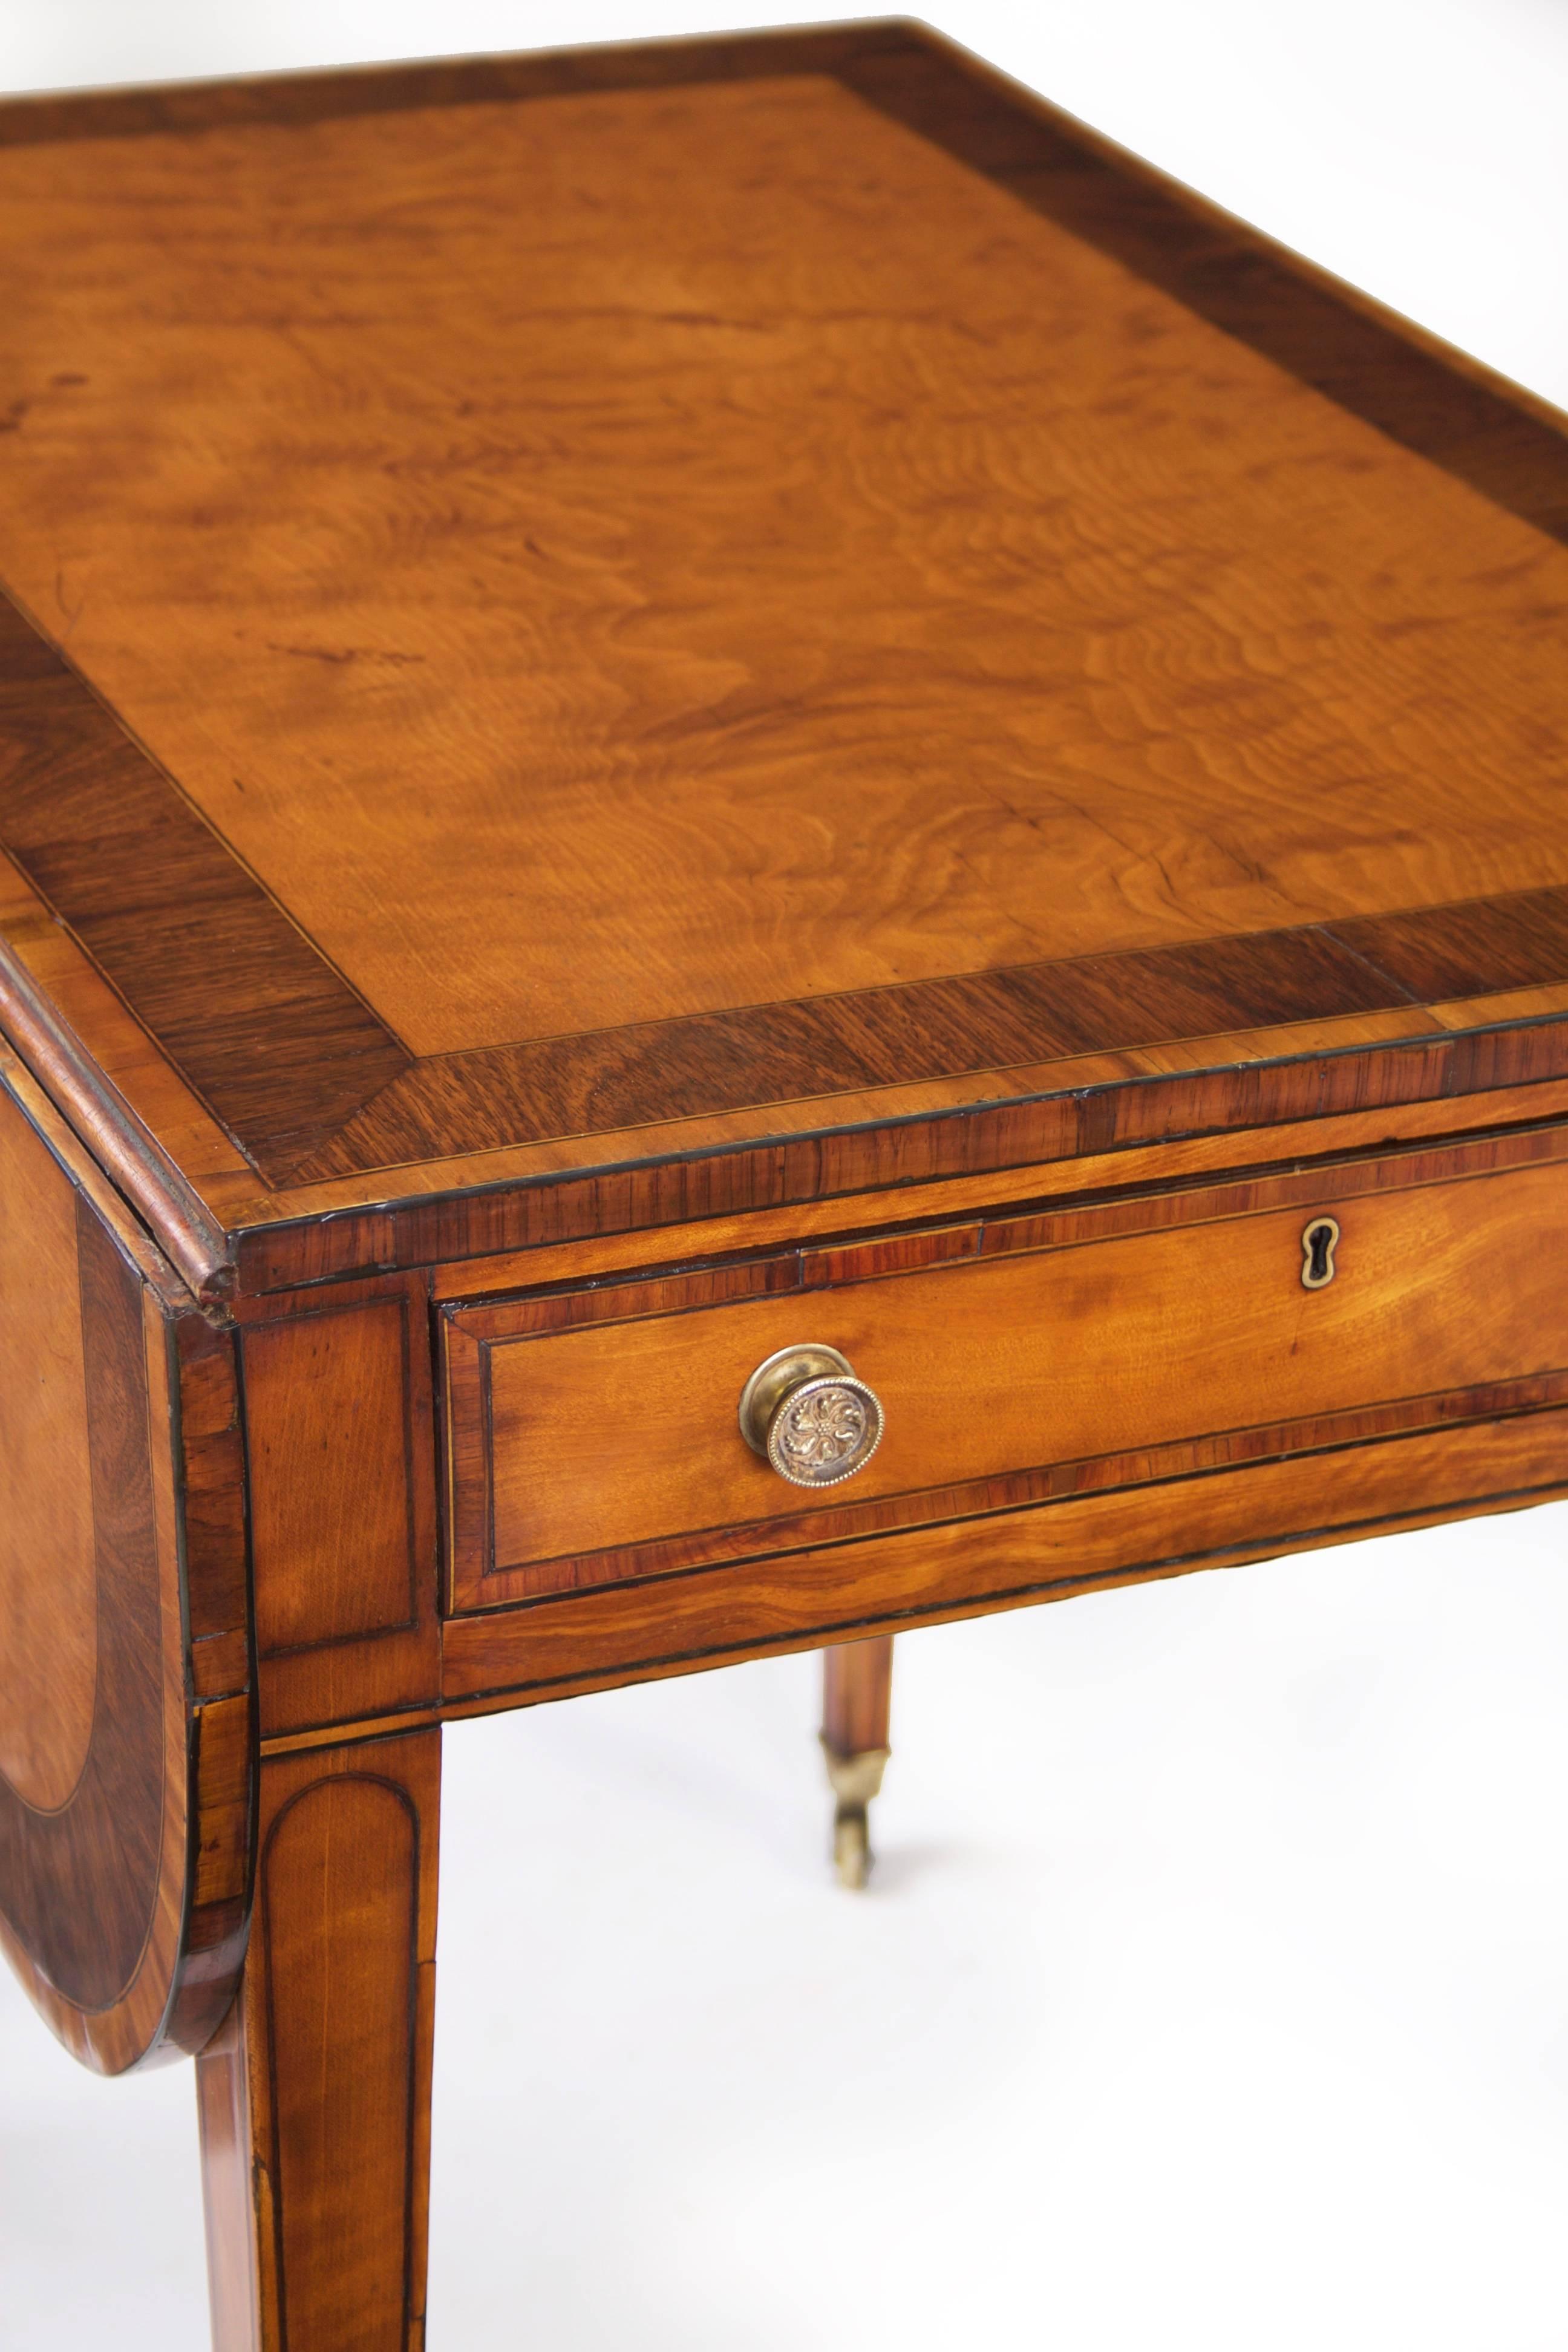 English George III Satinwood and Rosewood Banded Pembroke Table